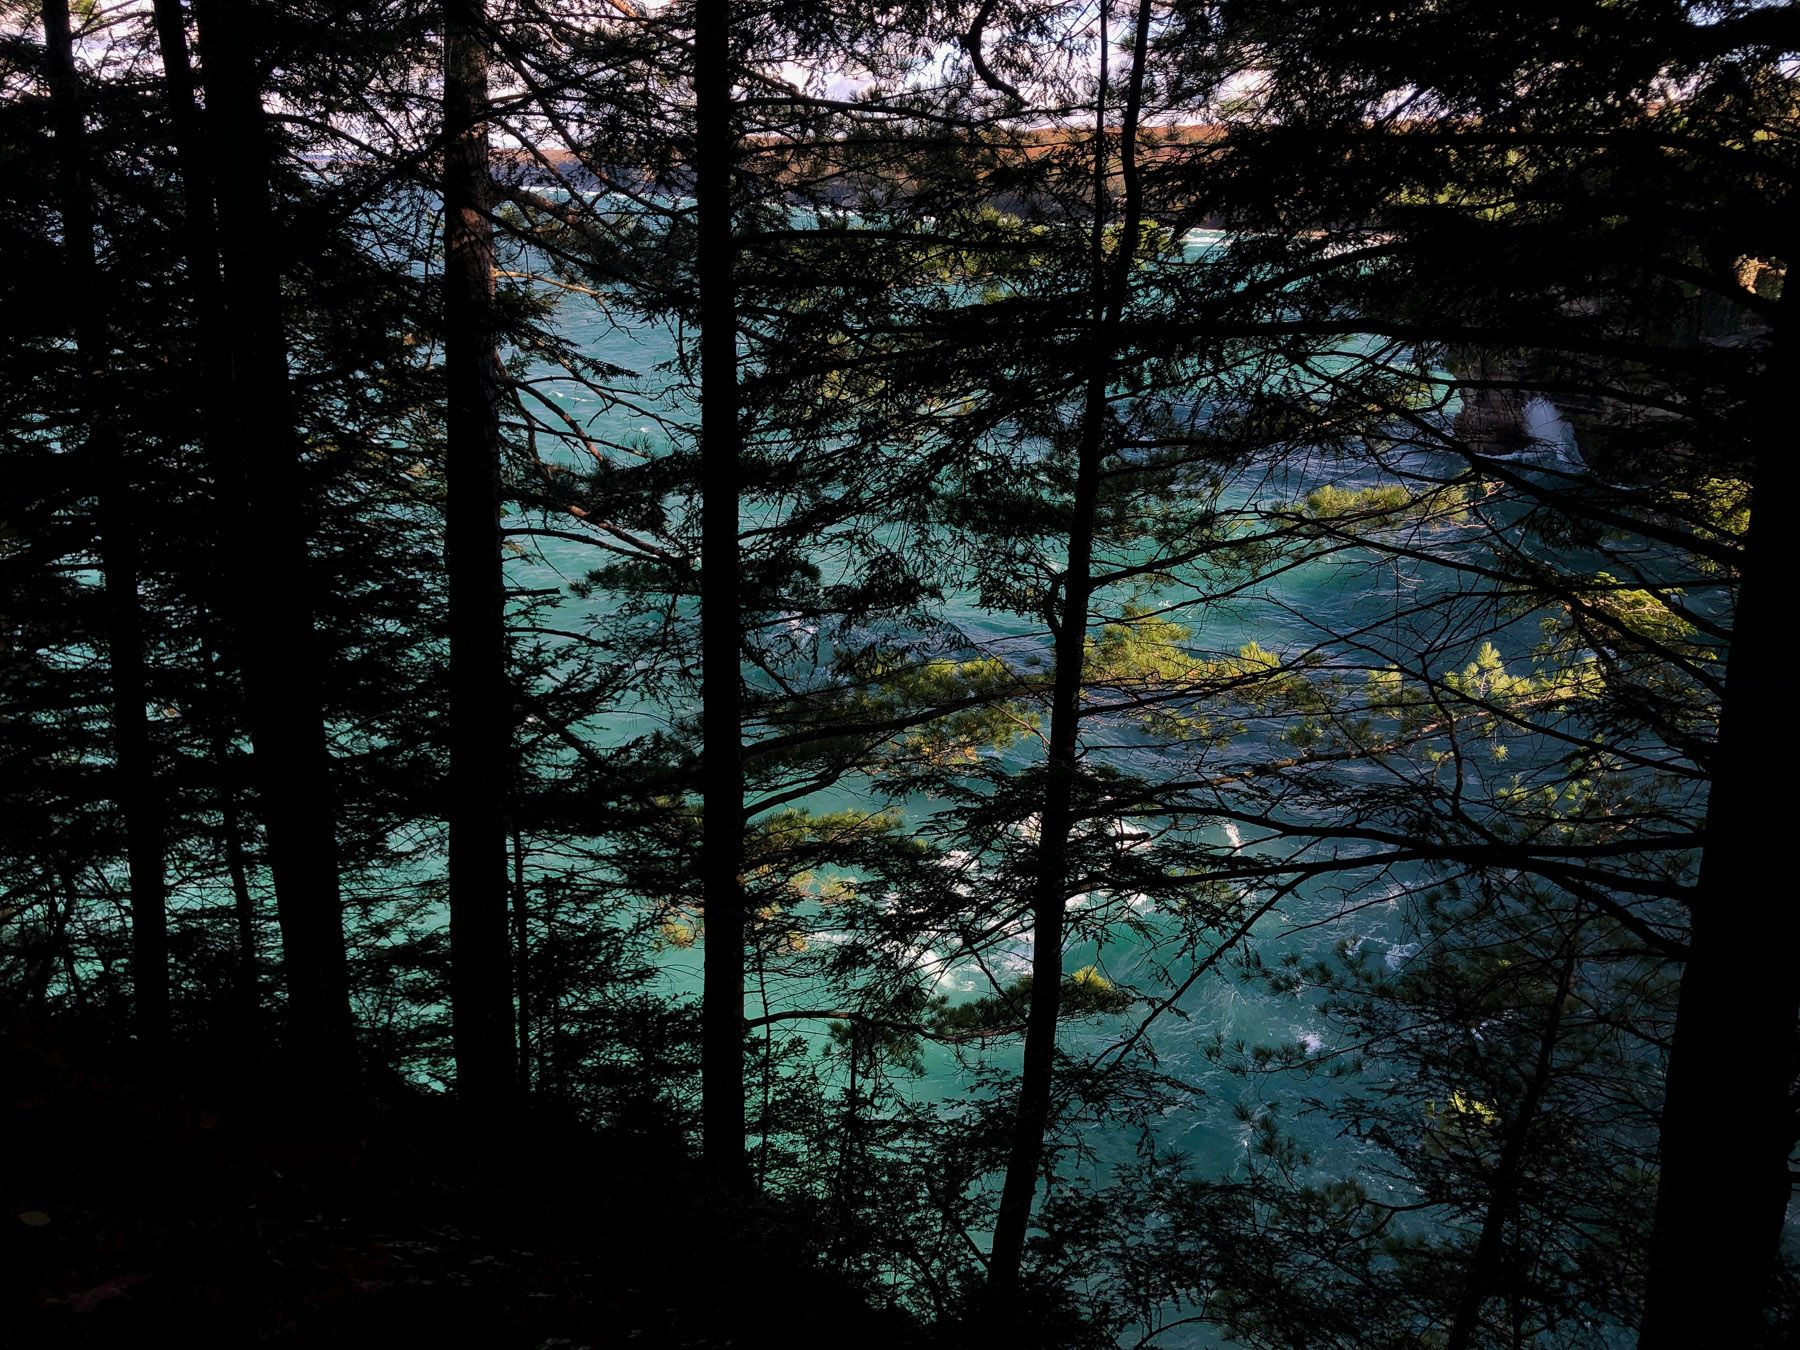 Blue water through a silhouette of pines. Patches of green leaves lit by sun.